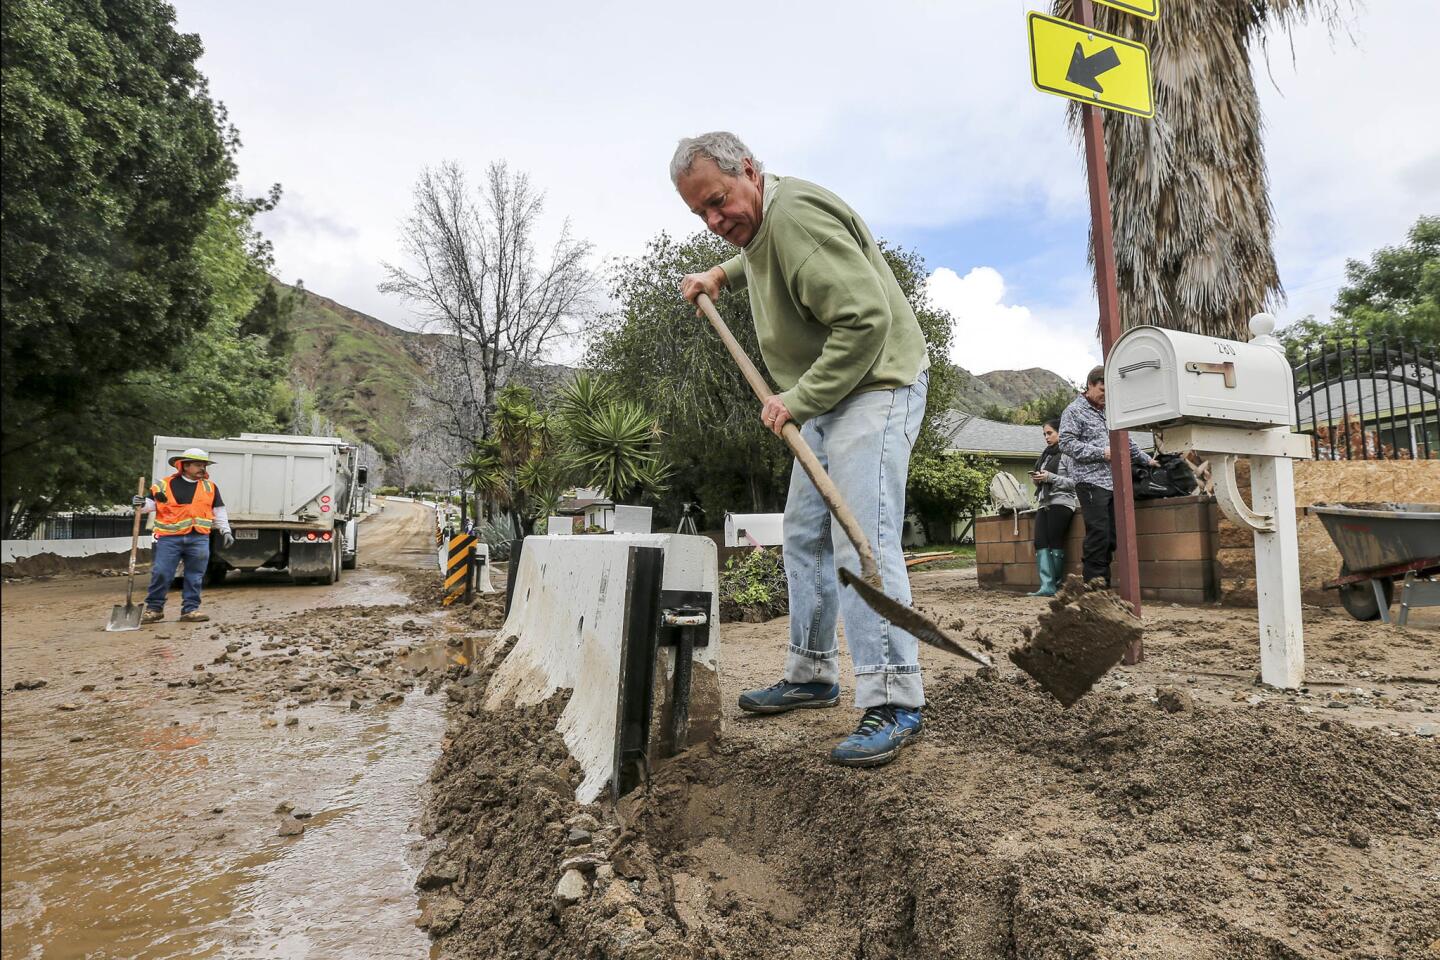 Richard Walker clears mud accumulated on his drive on Melcayon Road caused by last night's heavy rain in Duarte.